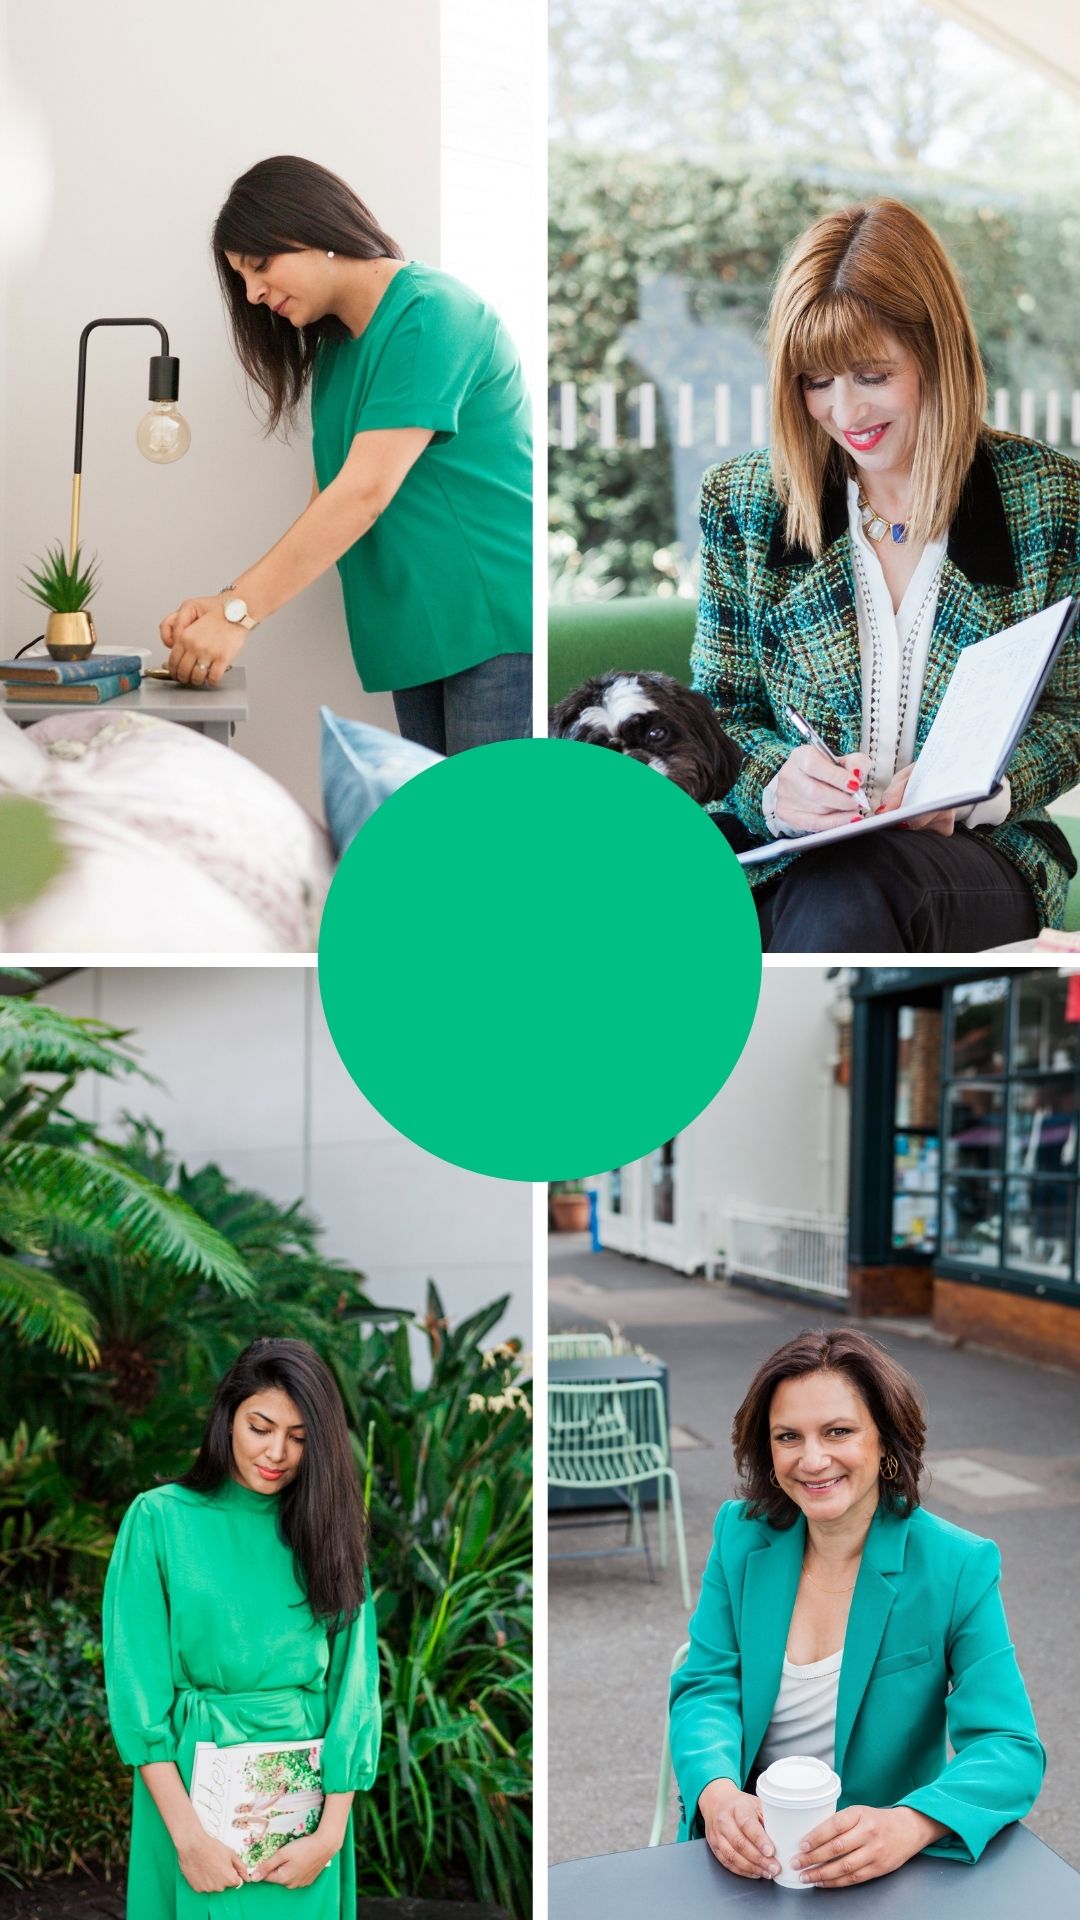 4 images of ladies wearing green for their brand shoot. images by London brand photographer AKP branding stories